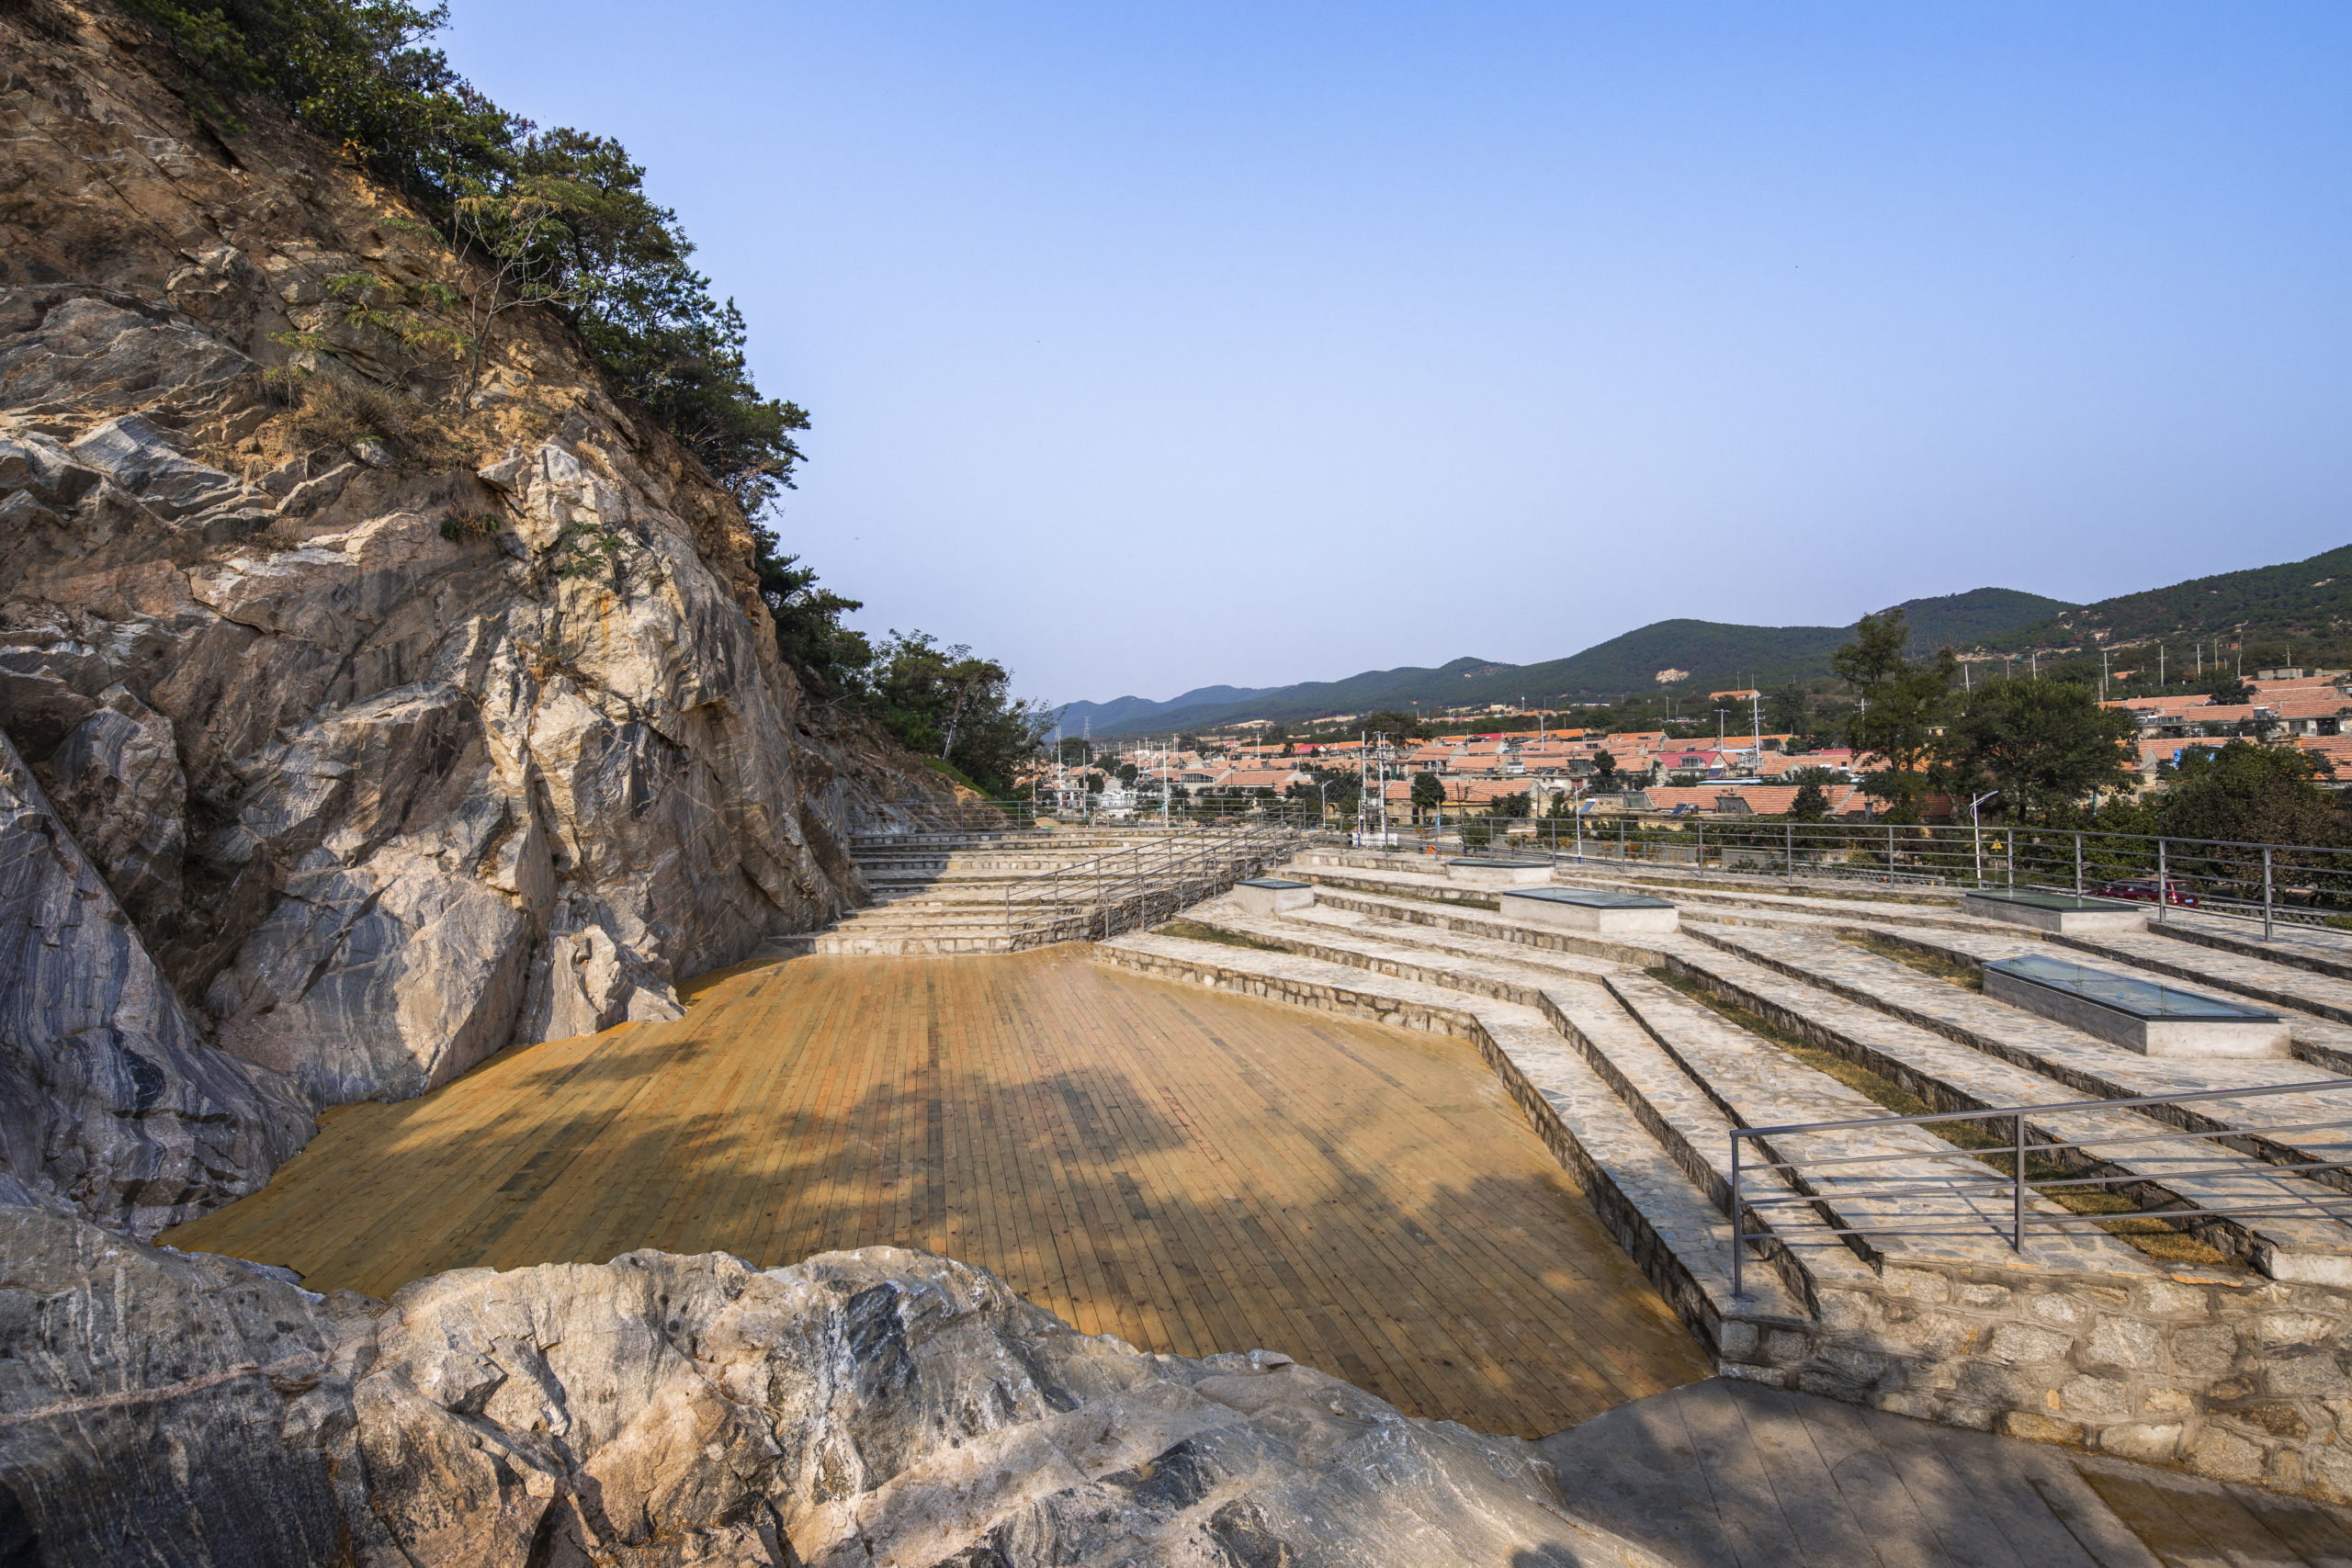 performance arts venues Stone Nest Amphitheatre for Community Activities by He Wei Studio／3andwich Design, Weihai, China